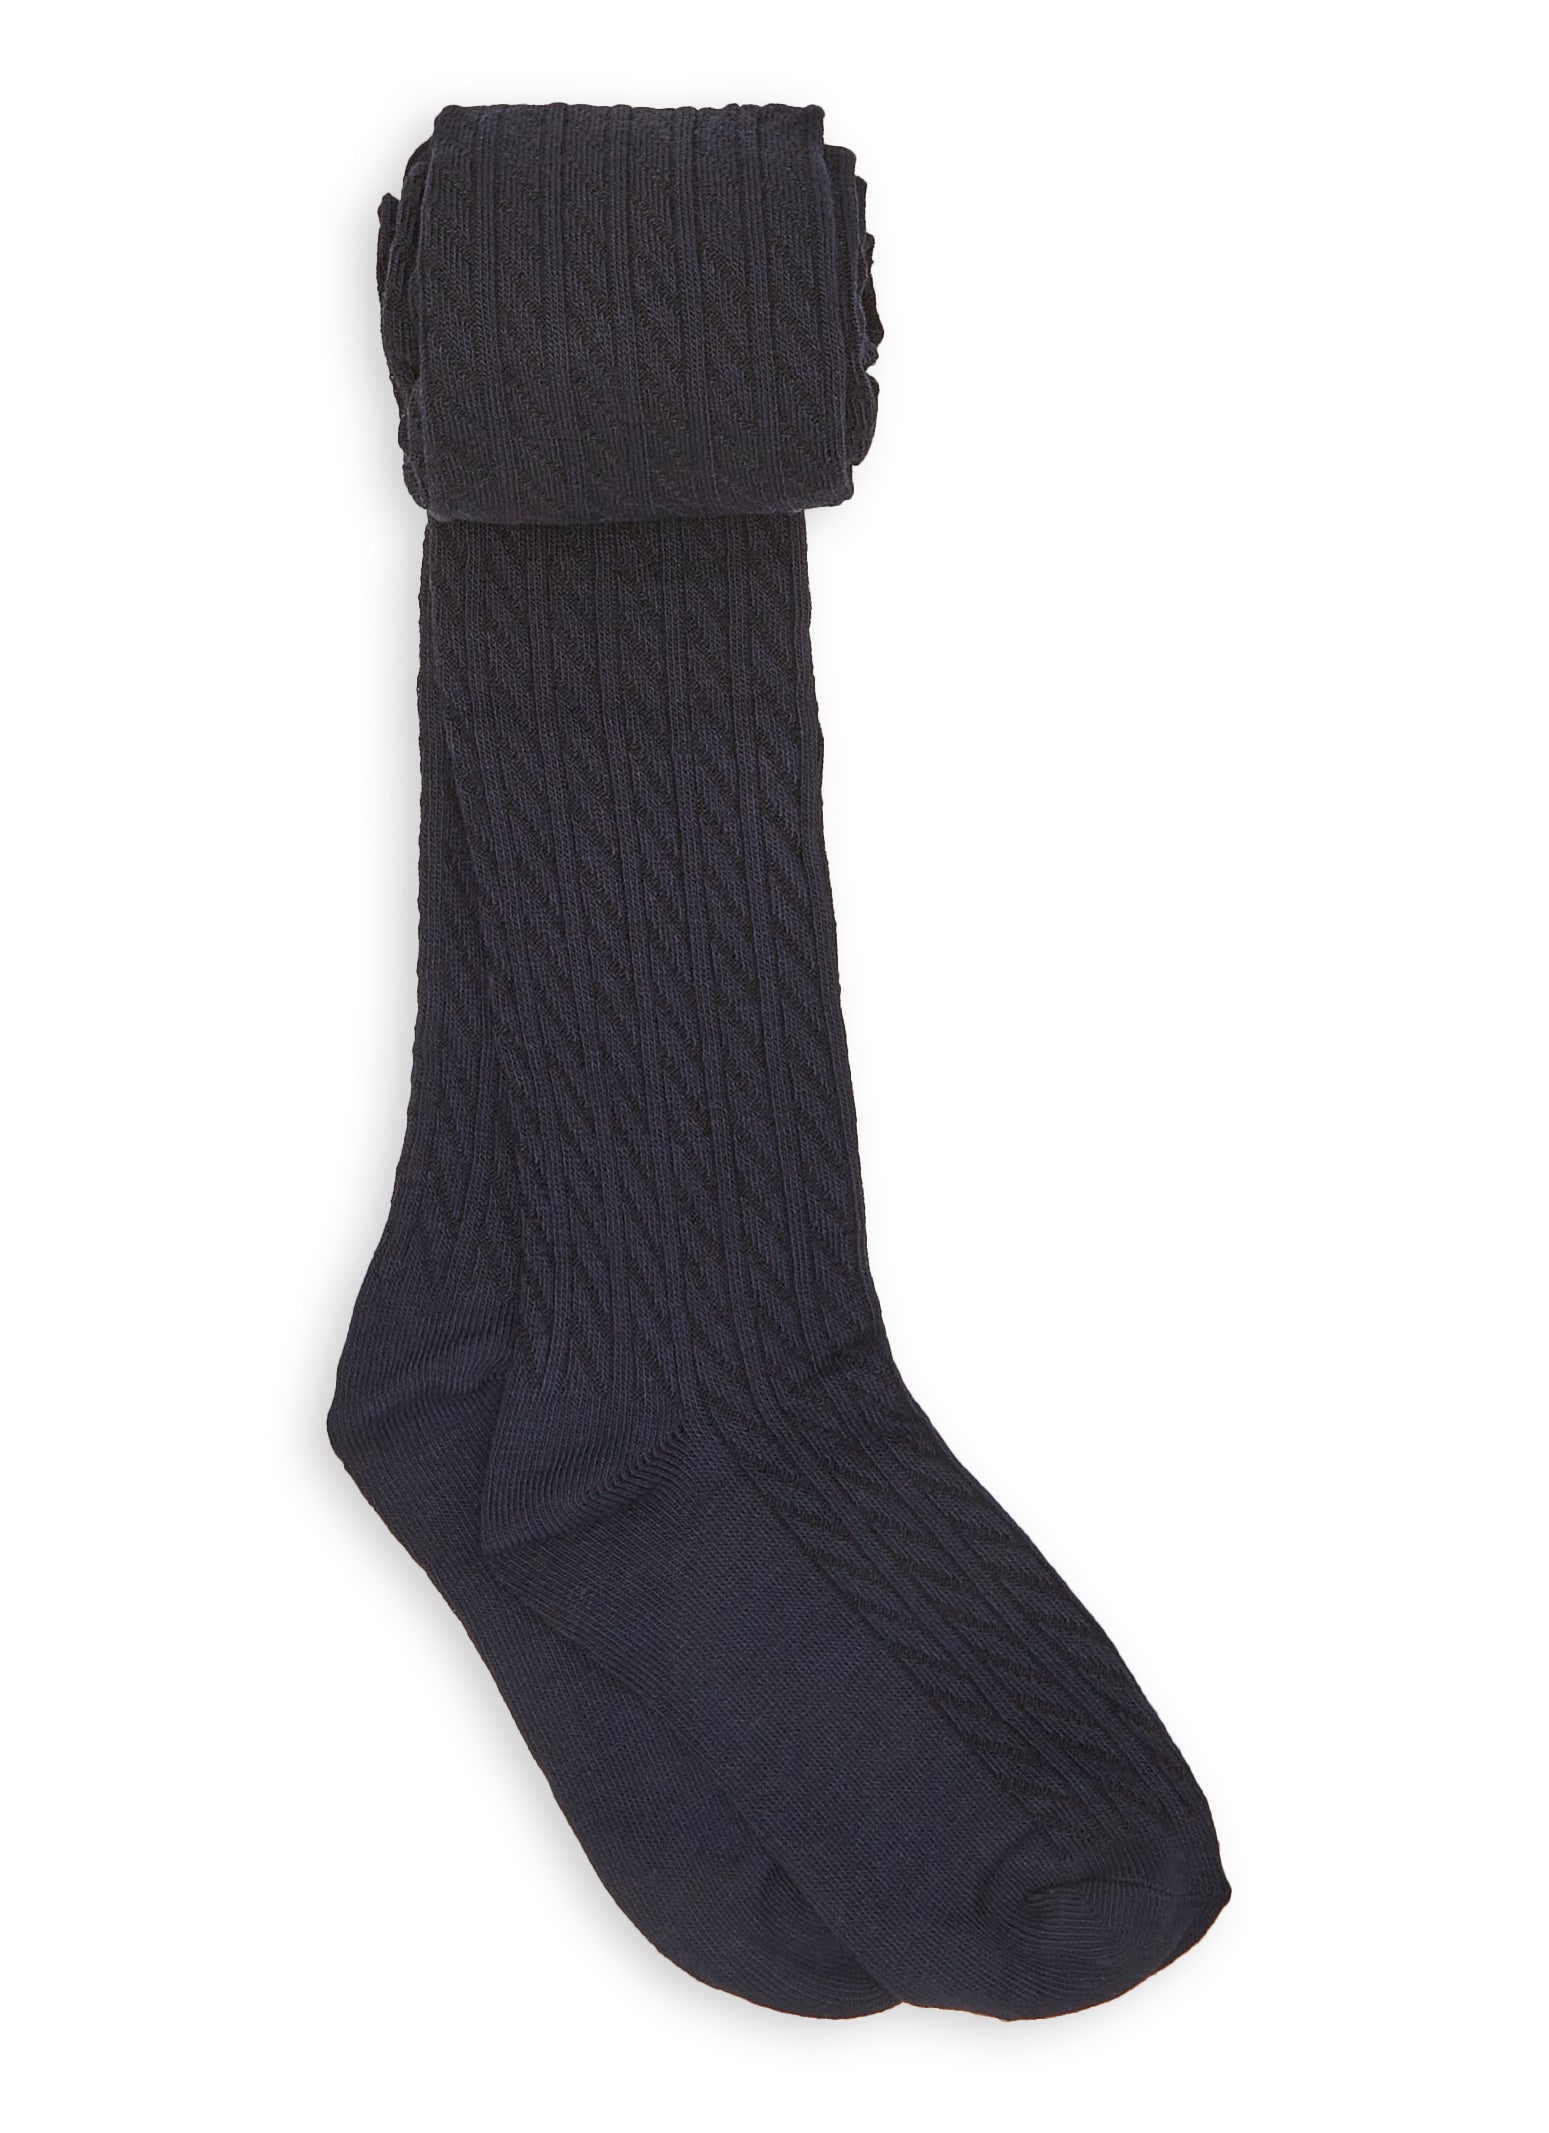 Plain Knitted Tights For Girls - Black